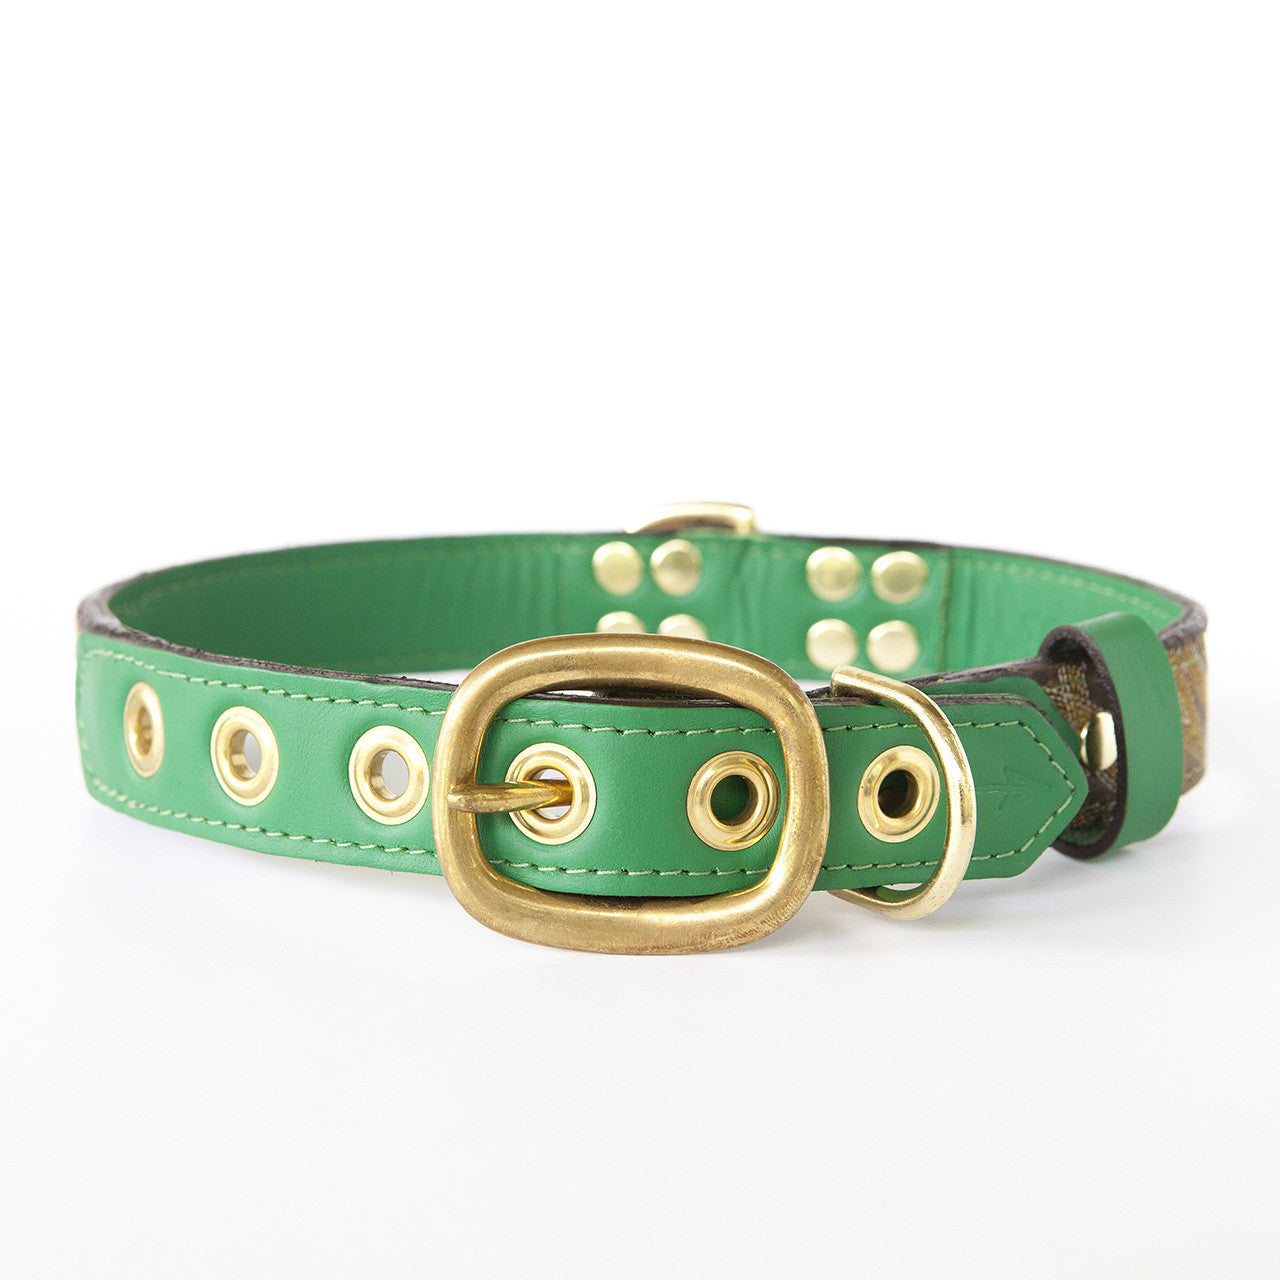 Emerald Green Dog Collar with Dark Brown Leather + Yellow and Tan ...